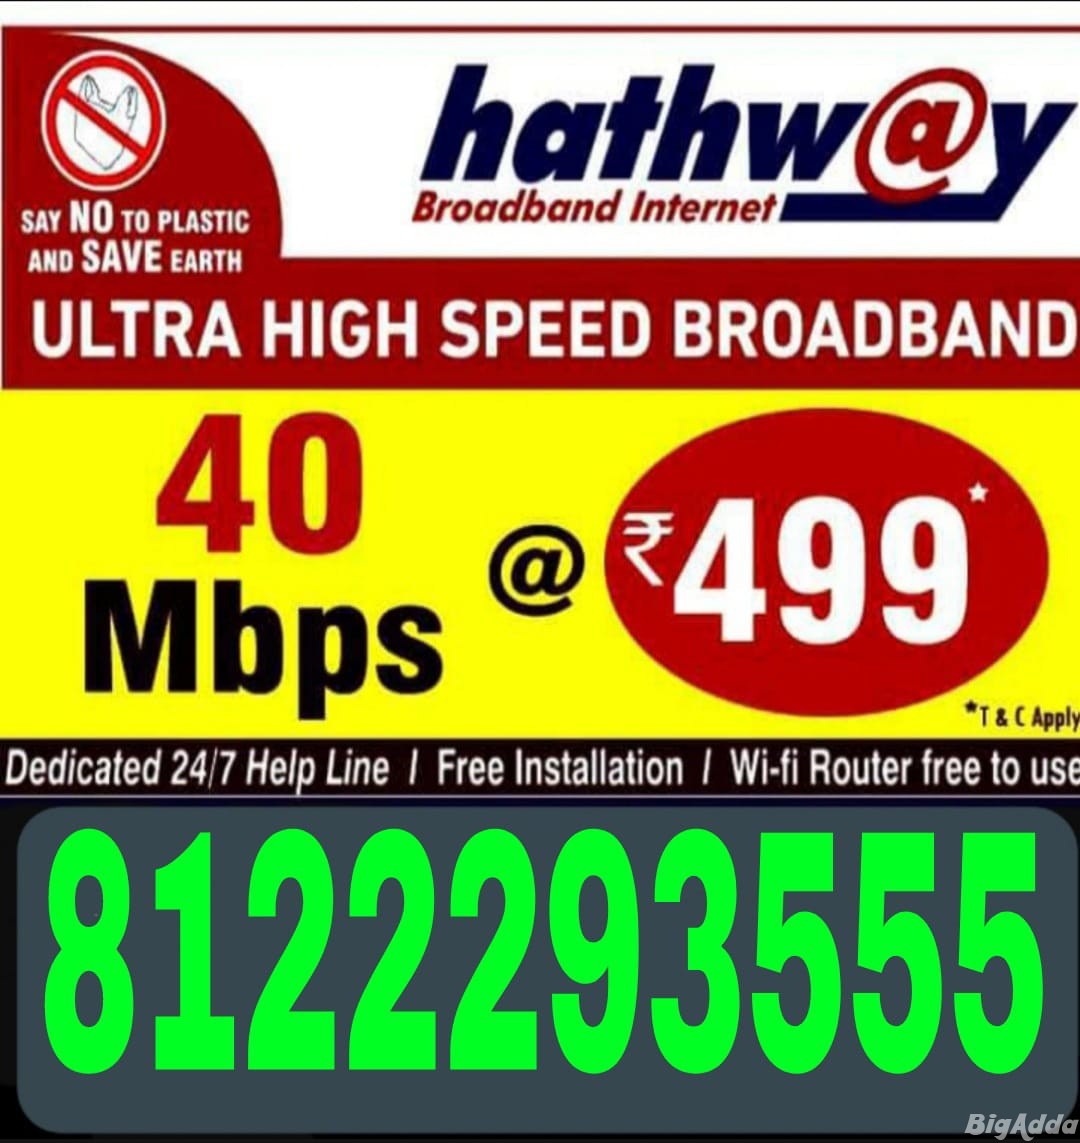 Hathway new connection offers call me 81488 98613